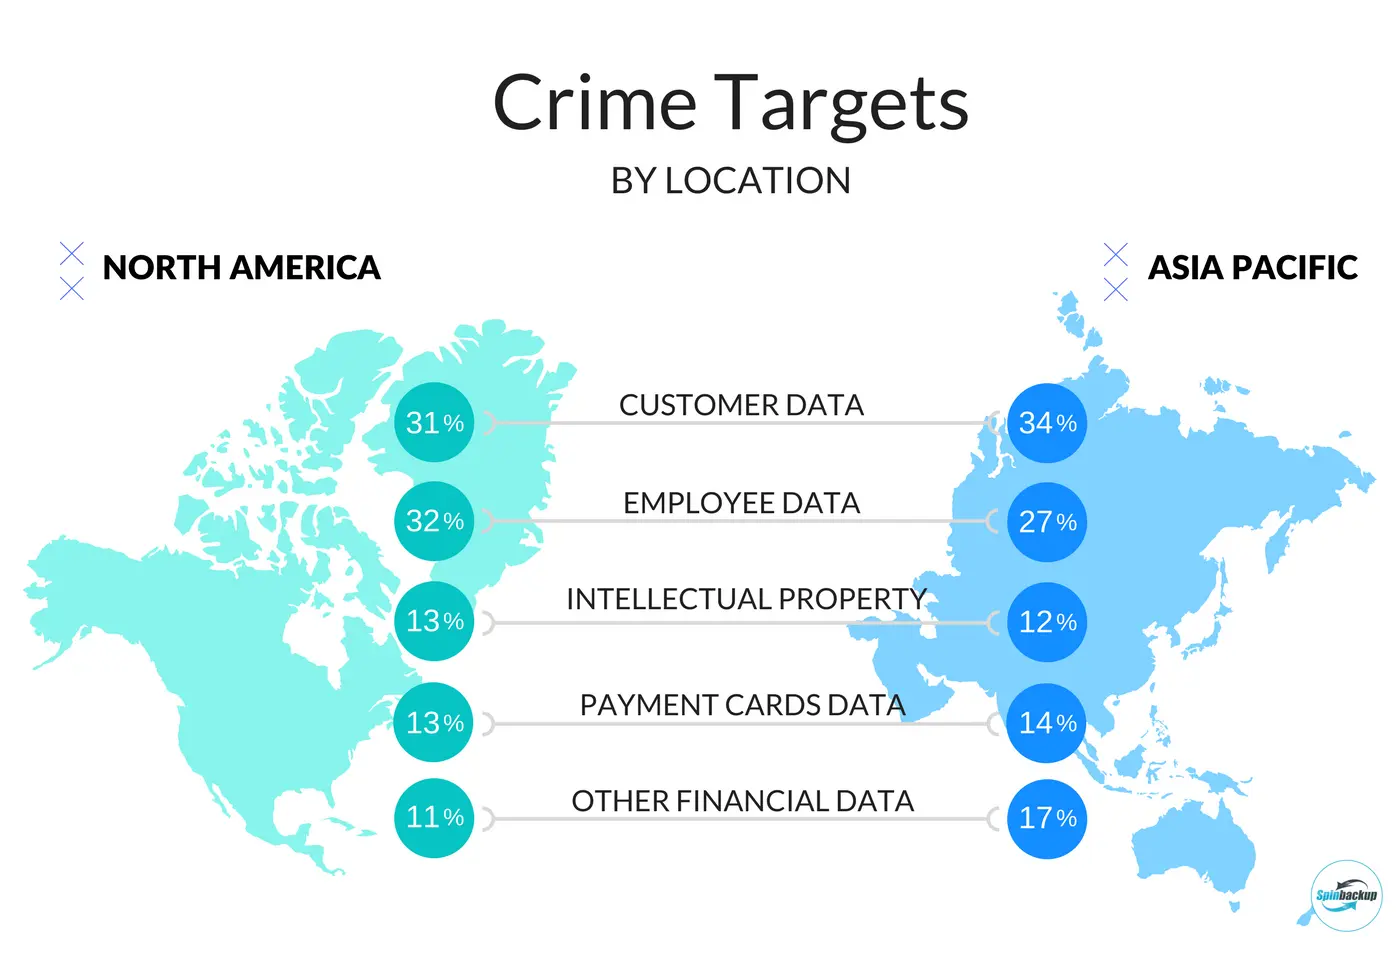 Crime targets by location